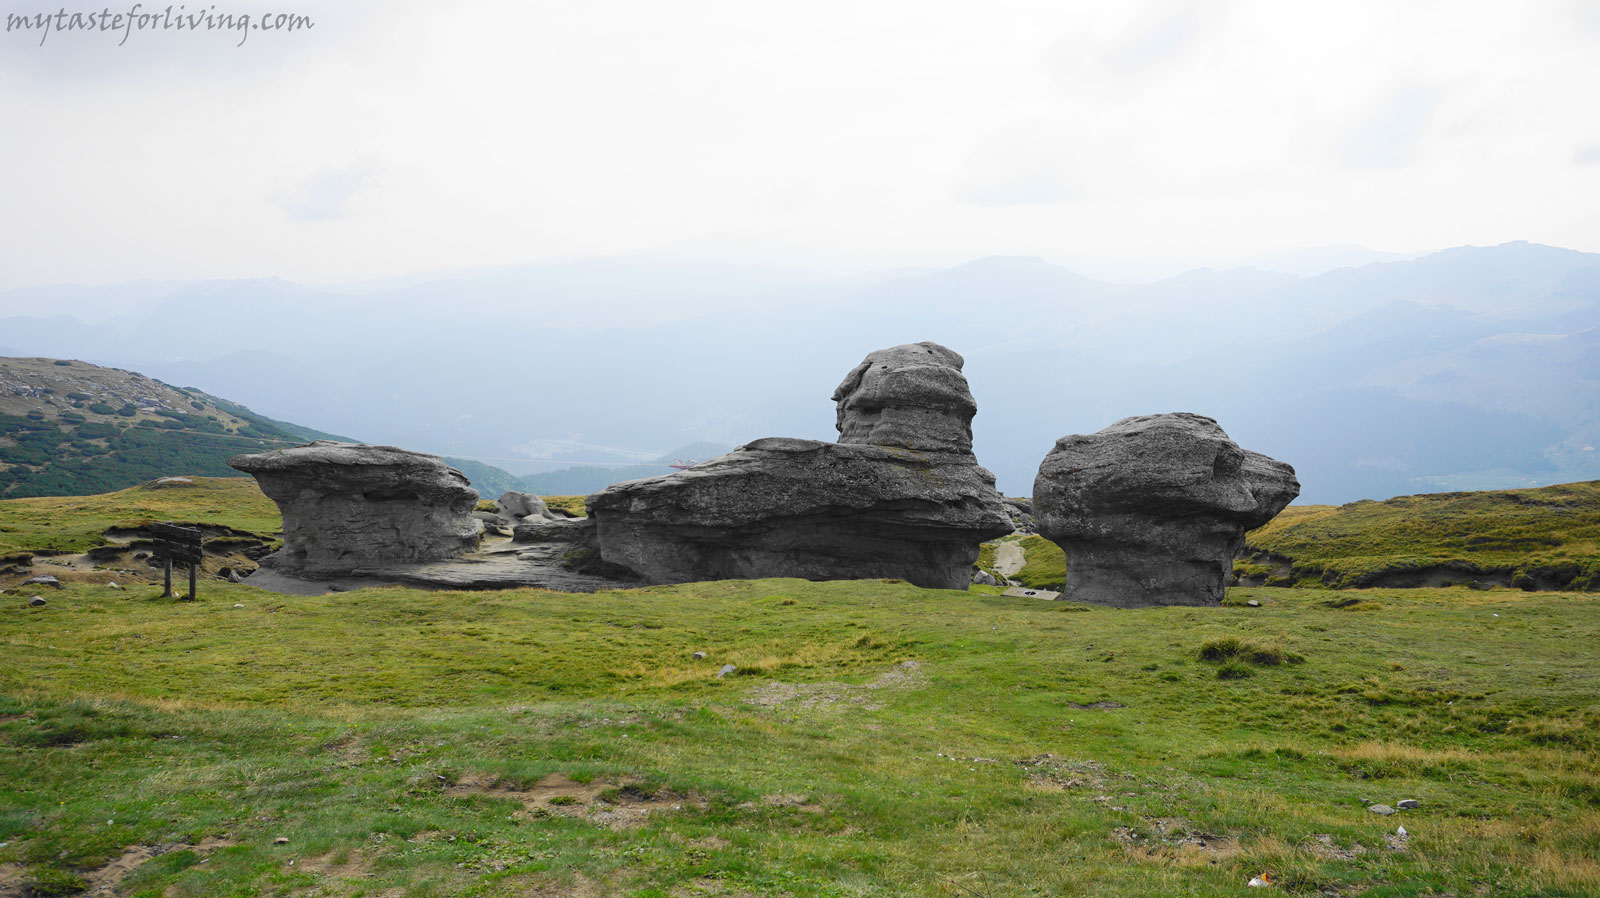 The Sphinx and Babele are on the list of the seven natural wonders of Romania and are one of the most visited places in the country. They are located in mount Bucegi, which belongs to the Carpathians mountain range.